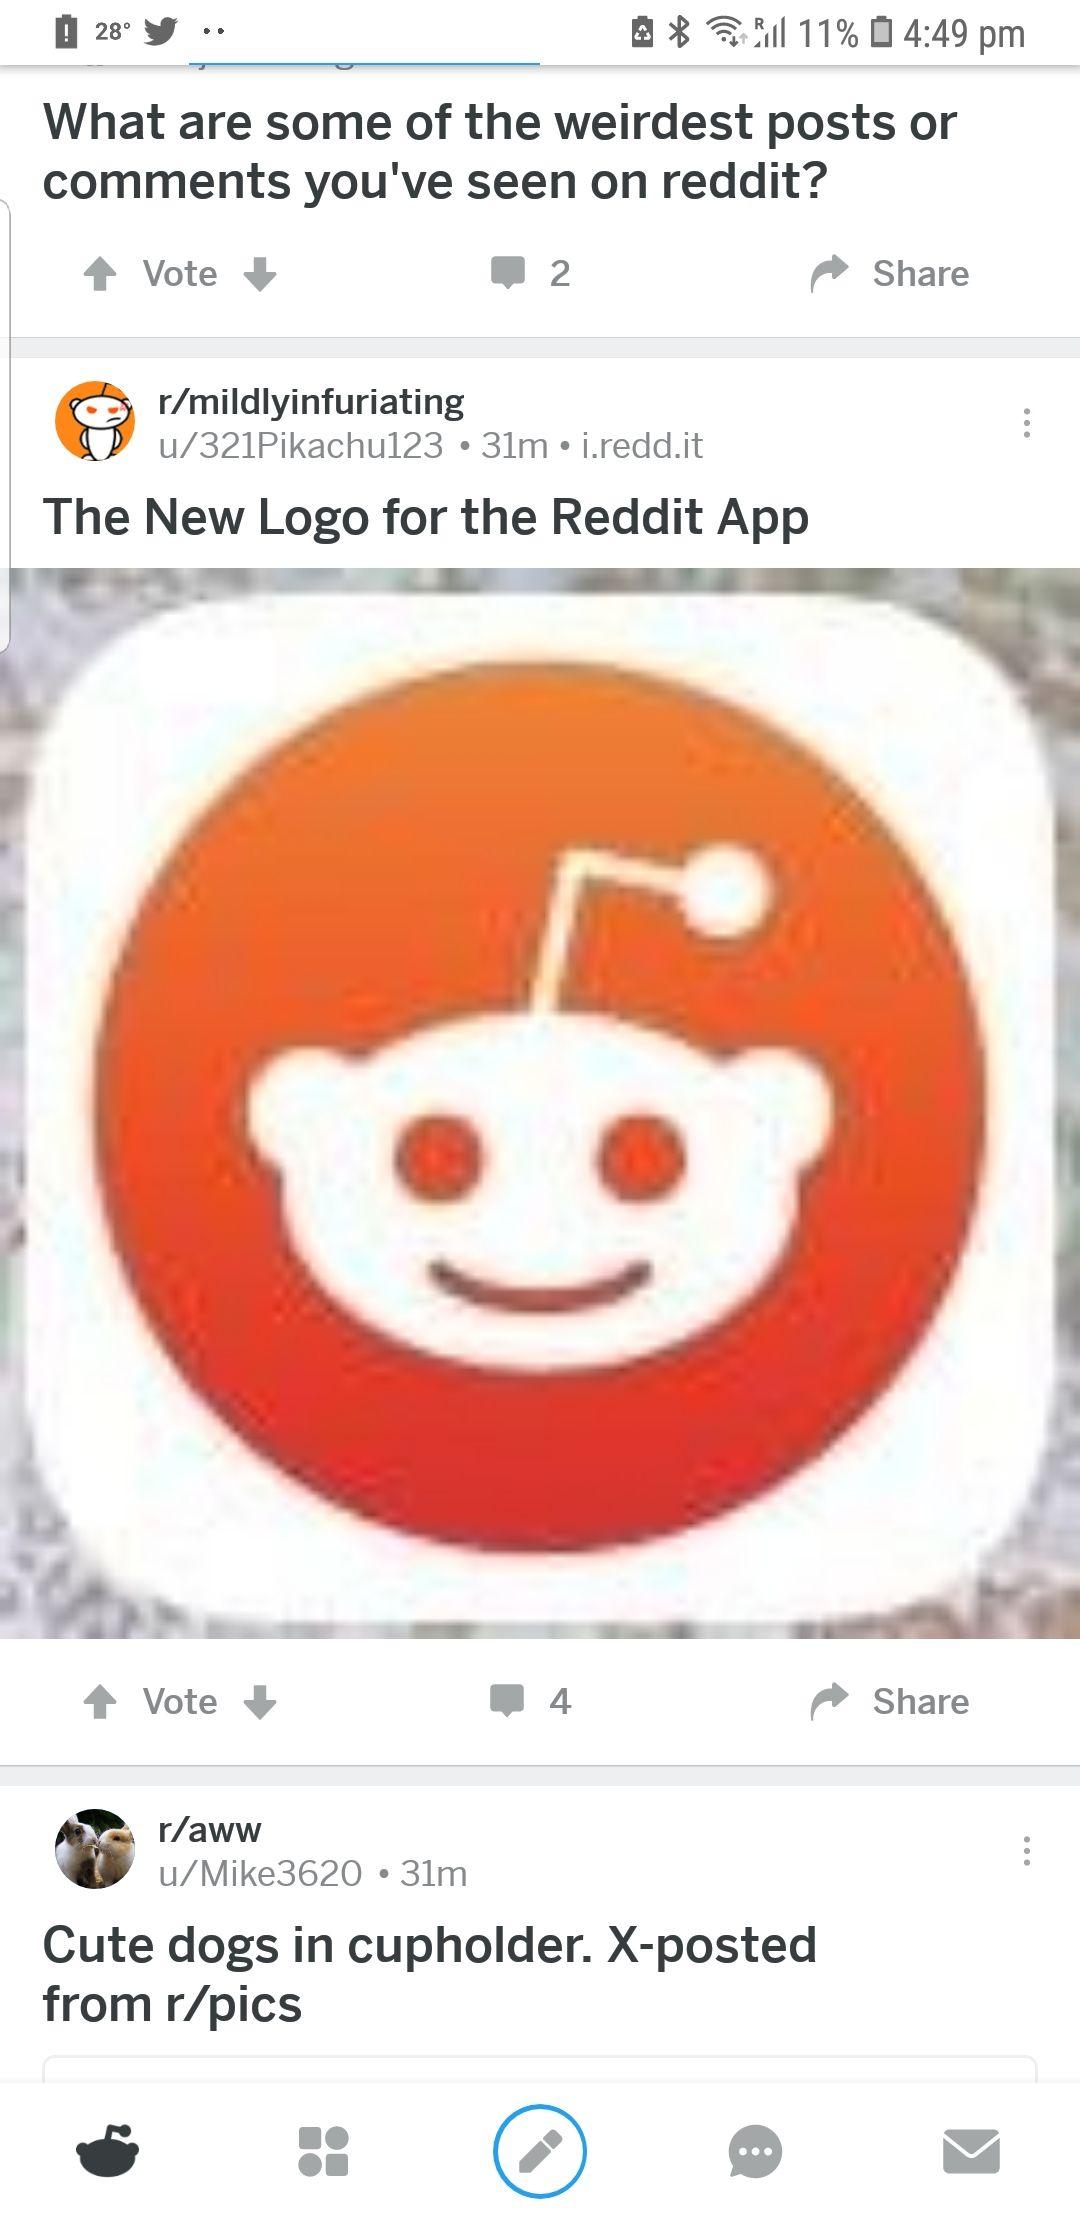 Reddit App Logo - Everyone posting about the new reddit app icon on this subreddit ...